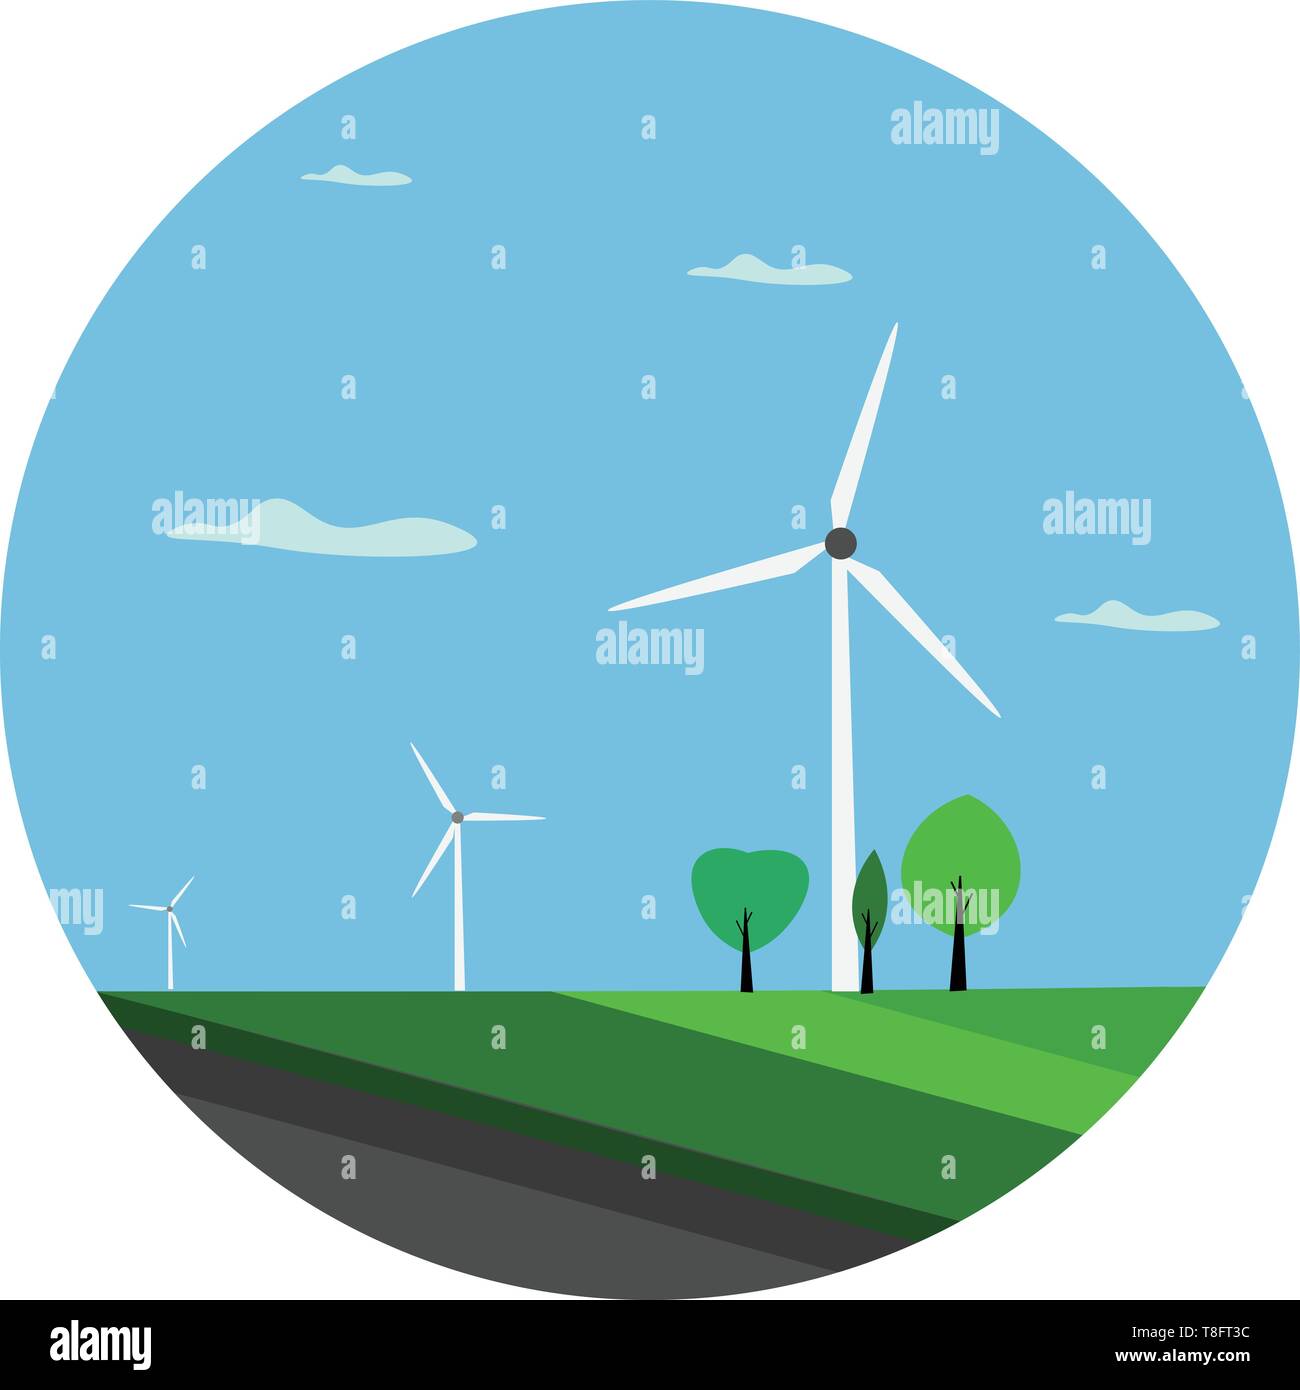 A landscape with few green trees and wind turbines that transforms the kinetic energy in the wind into mechanical power used for grinding grain or pum Stock Vector